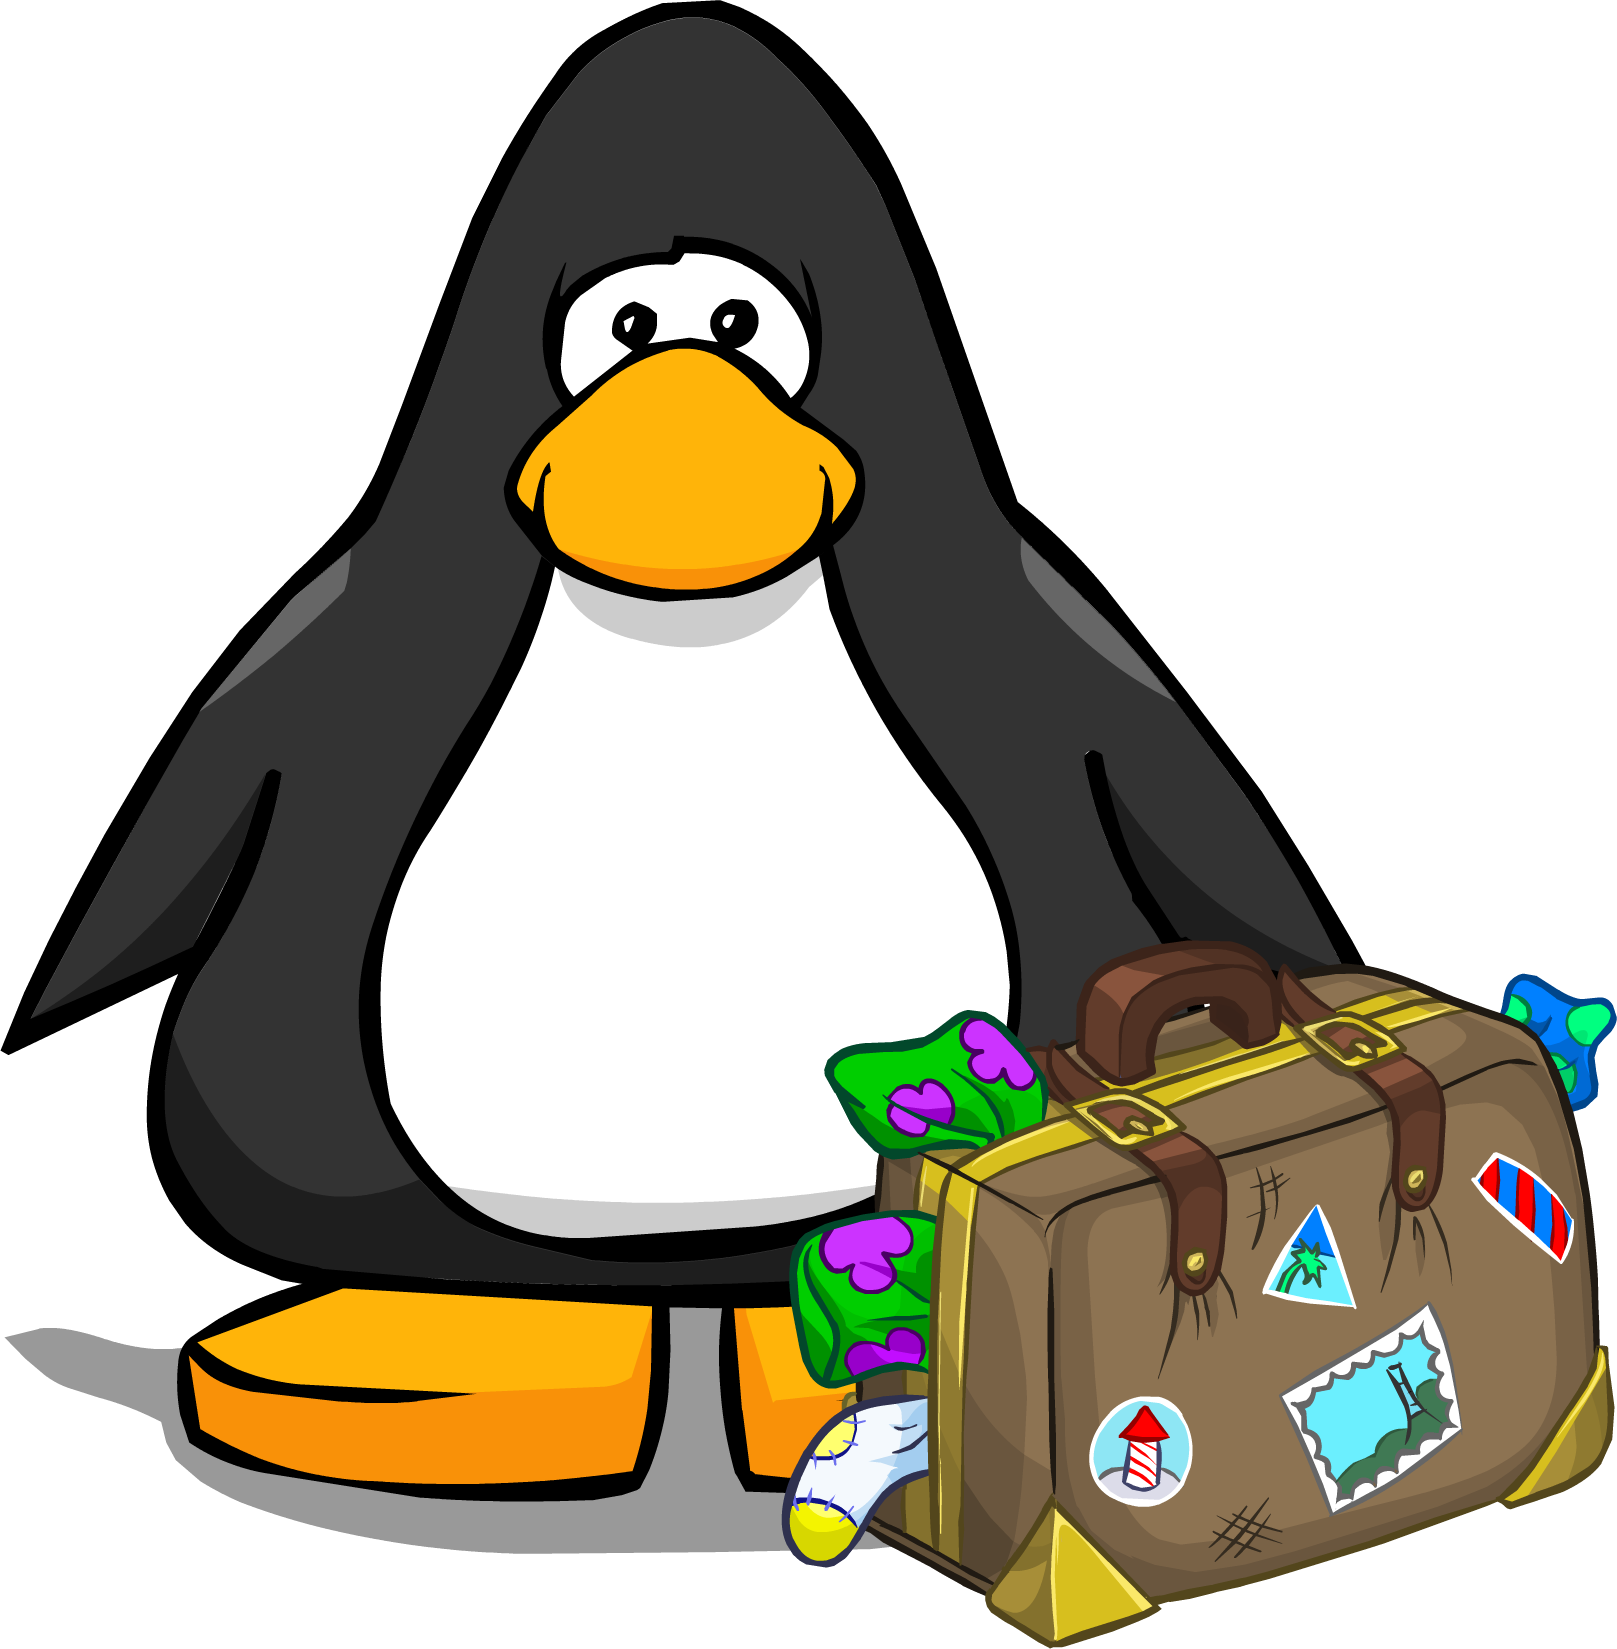 Overflowing Suitcase Pc - Penguin With Suitcase Cartoon (1617x1649)